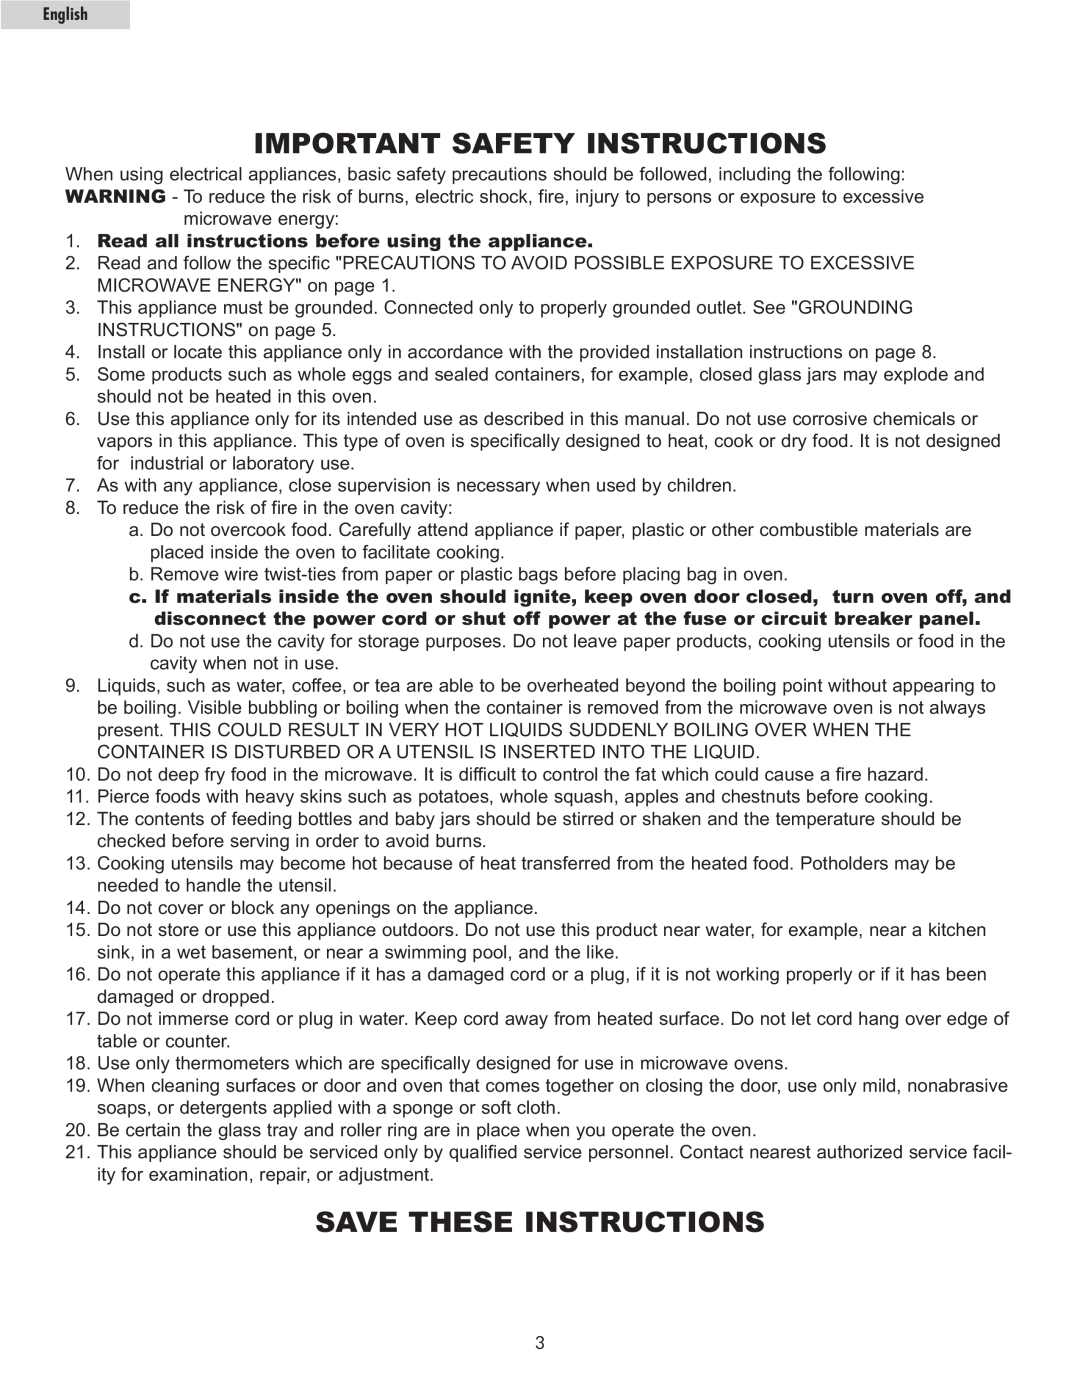 Haier MWM10100SS Important Safety Instructions, Save These Instructions, Read all instructions before using the appliance 